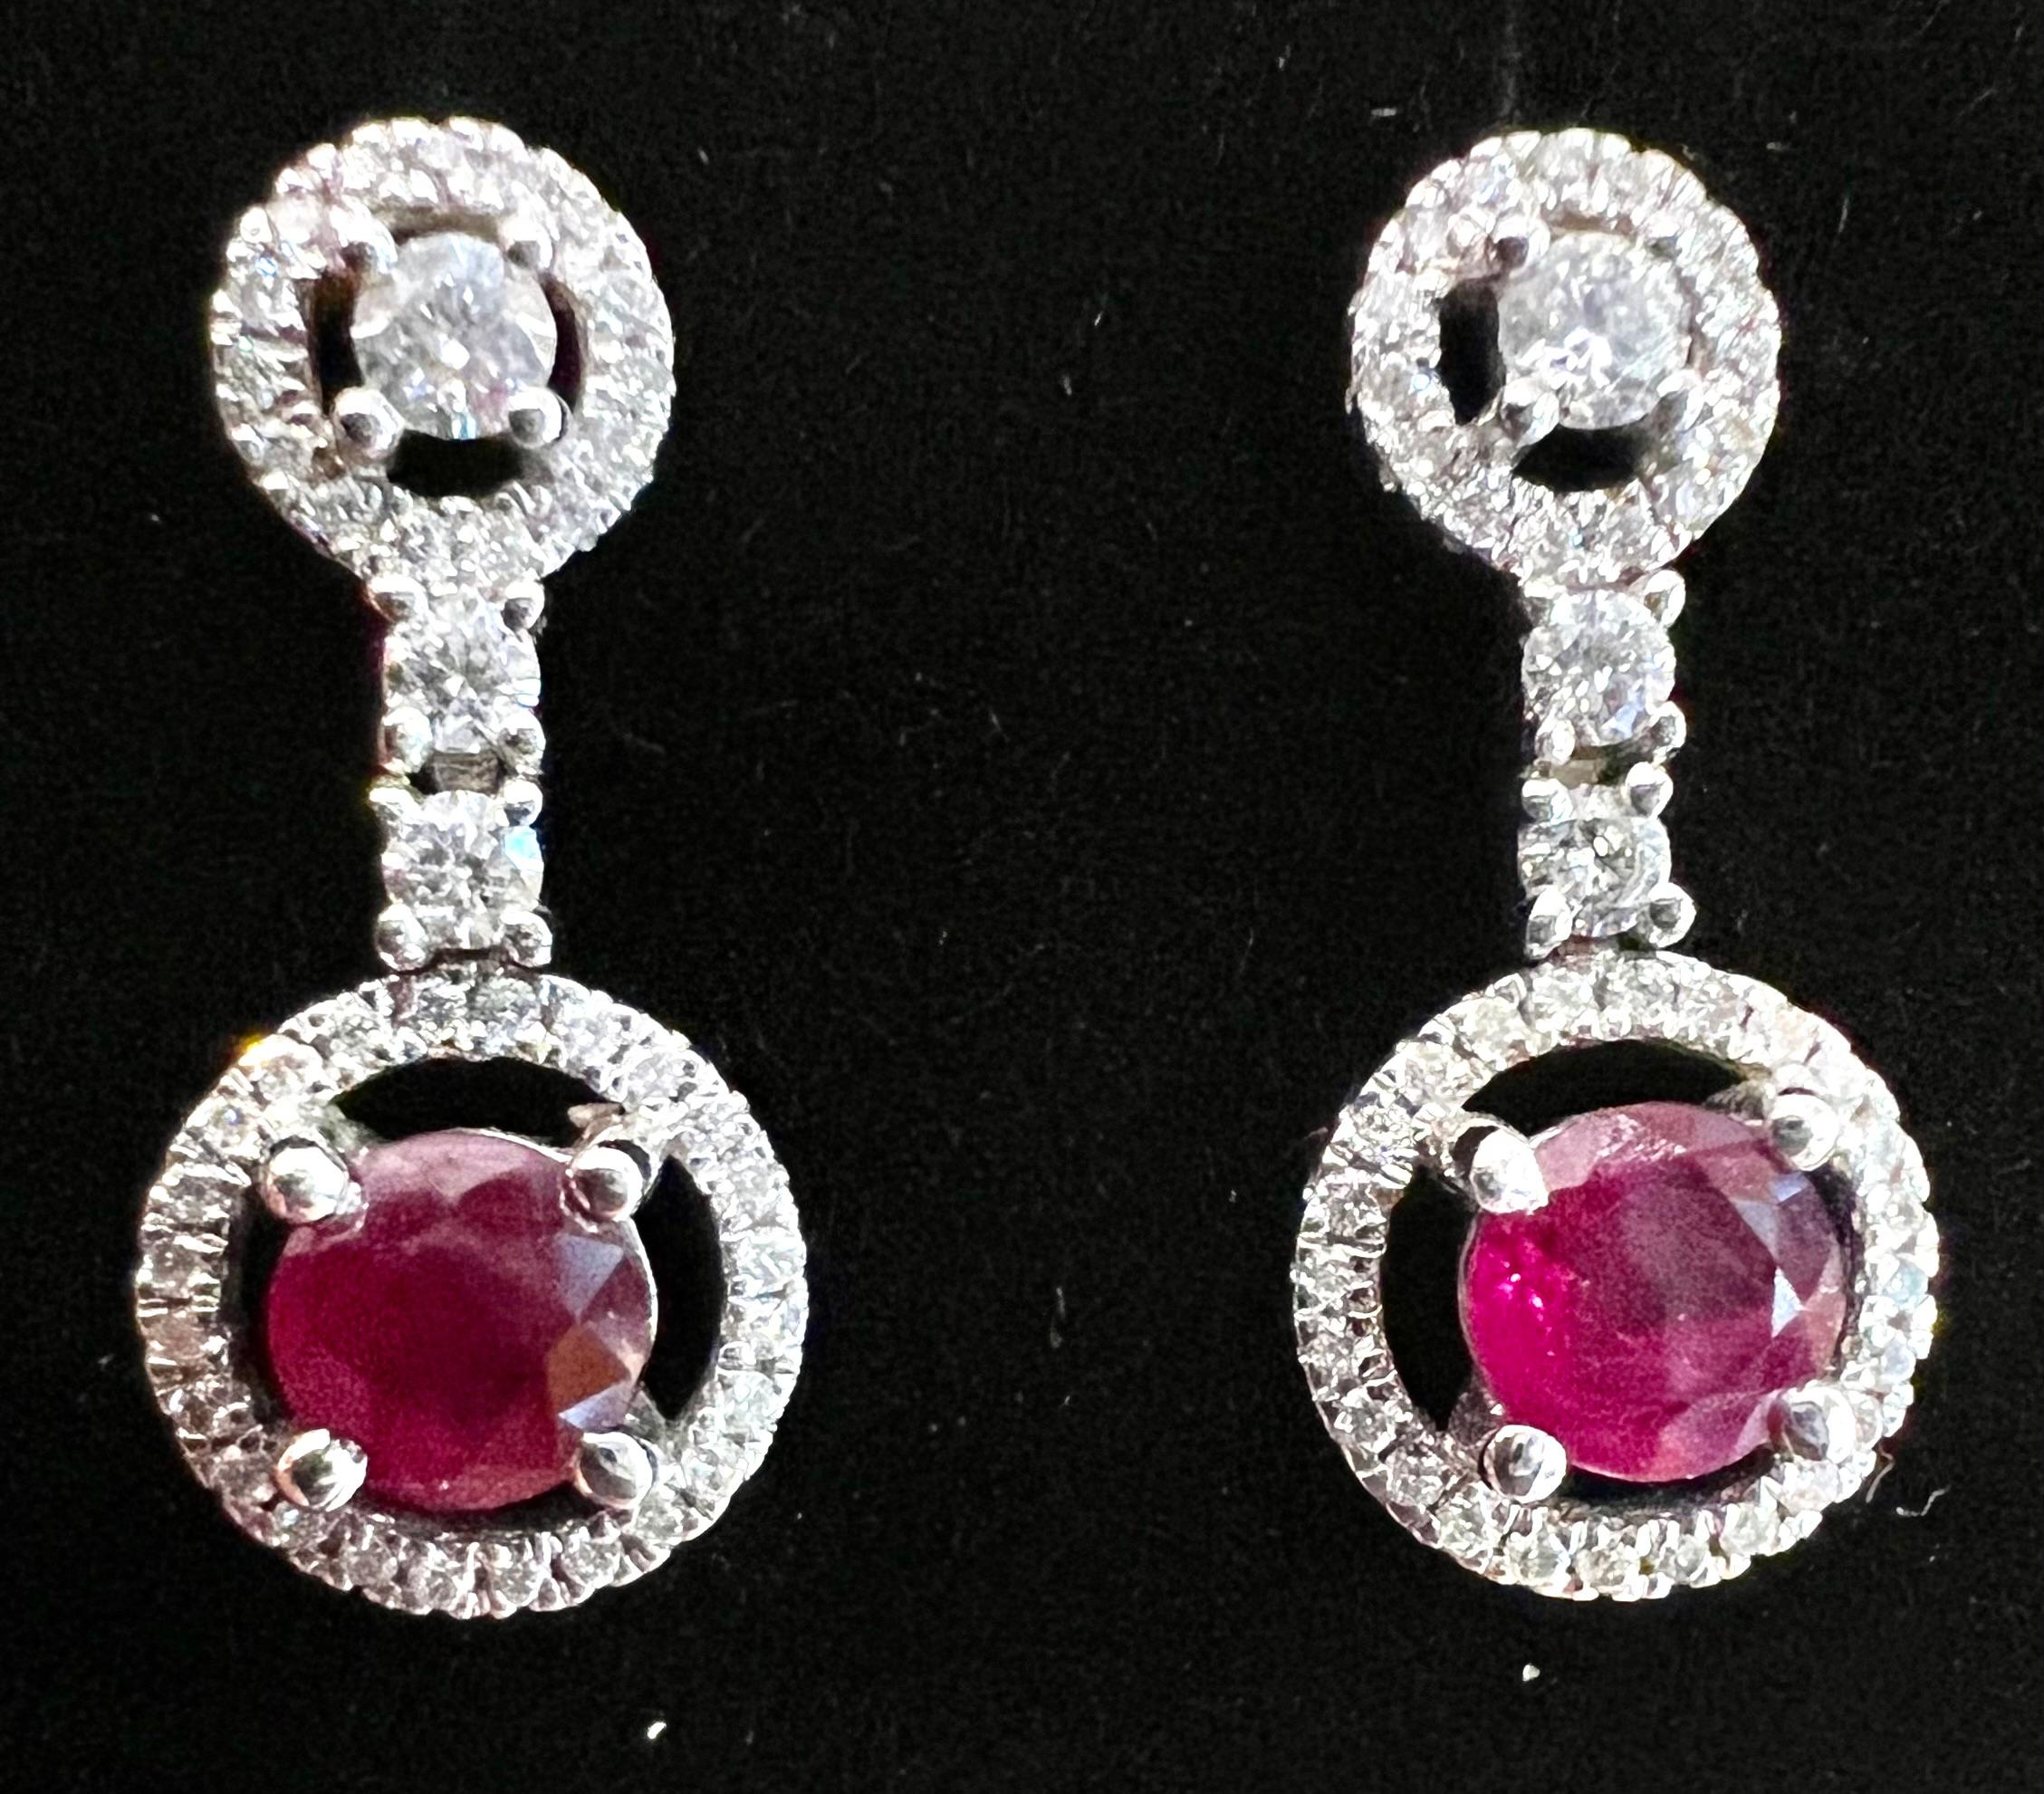 Women's 18 Carat White Gold Earrings Set with Rubies and Brilliants